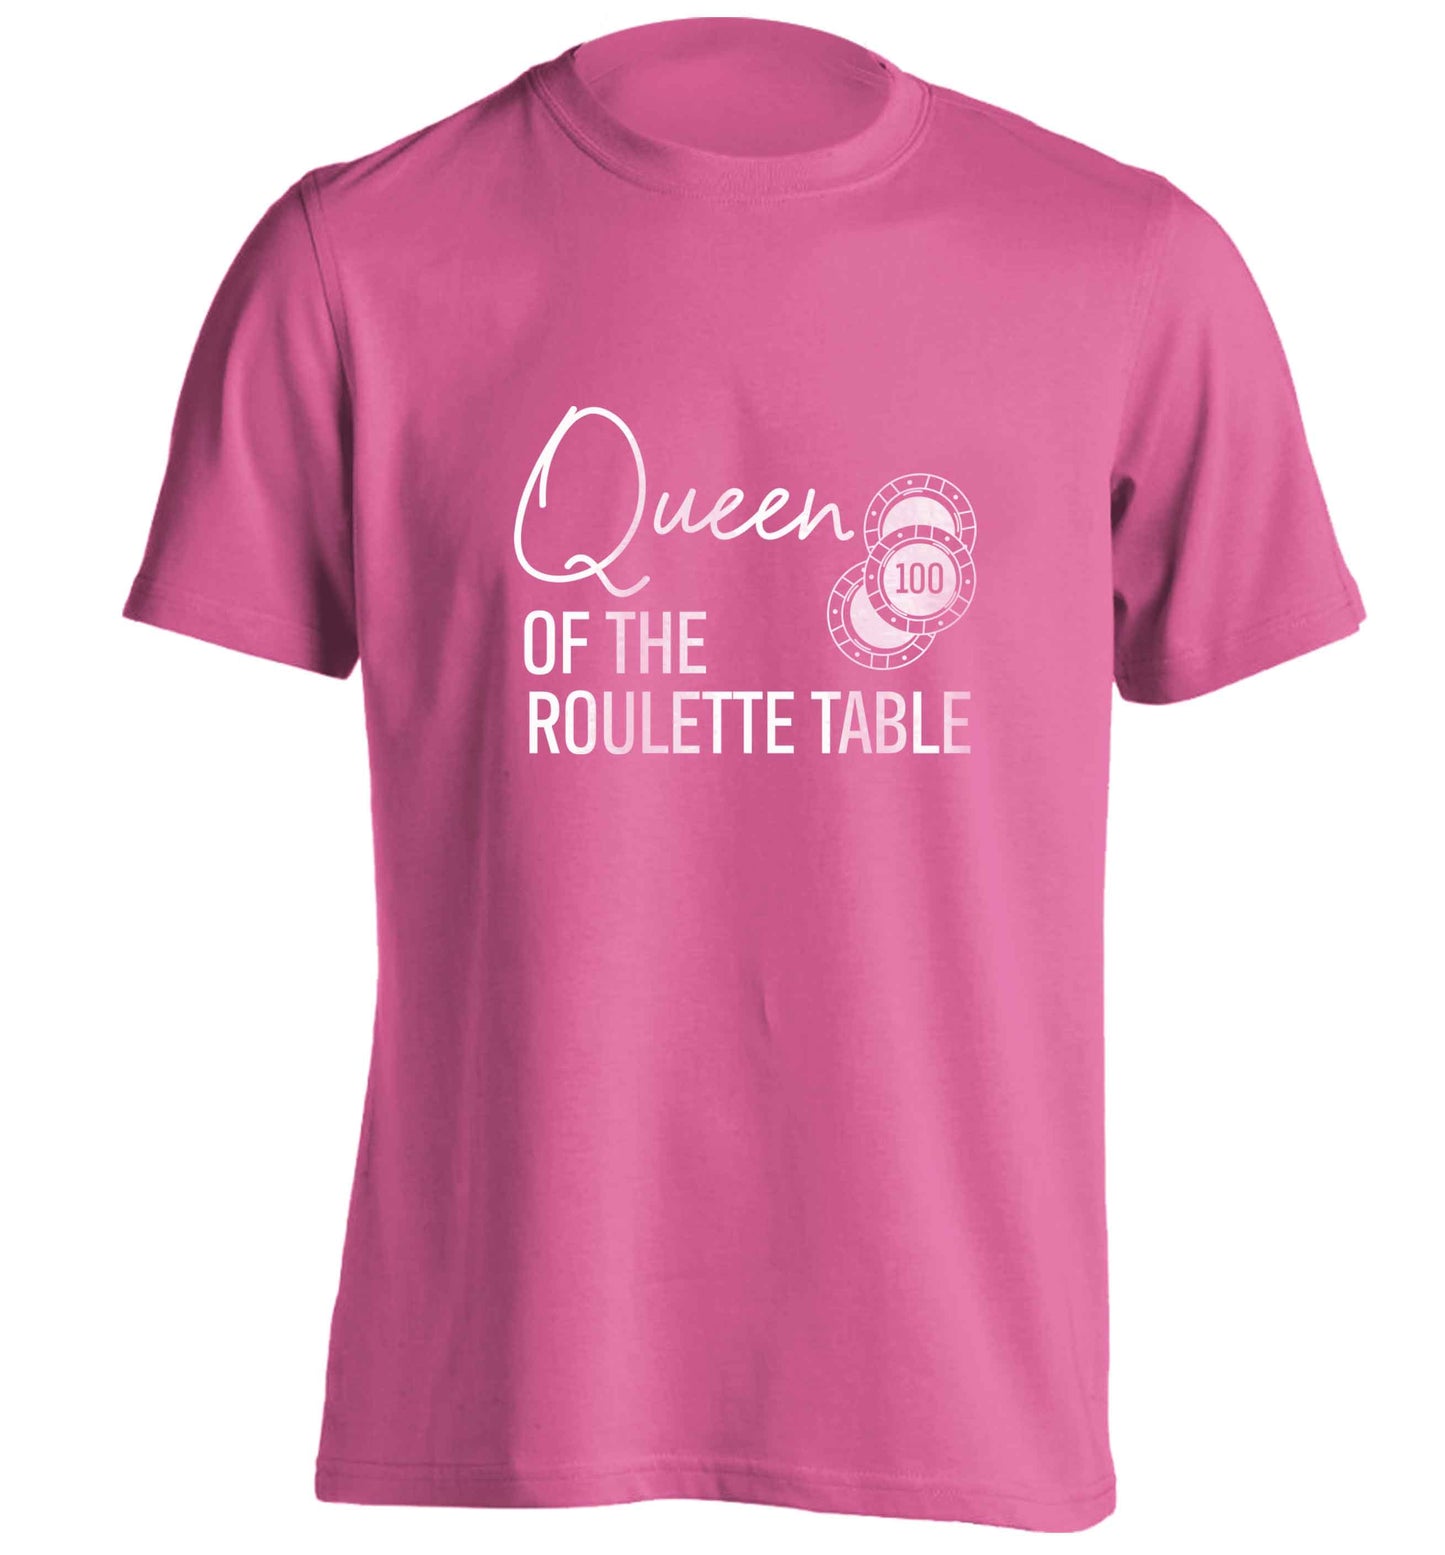 Queen of the roulette table adults unisex pink Tshirt 2XL